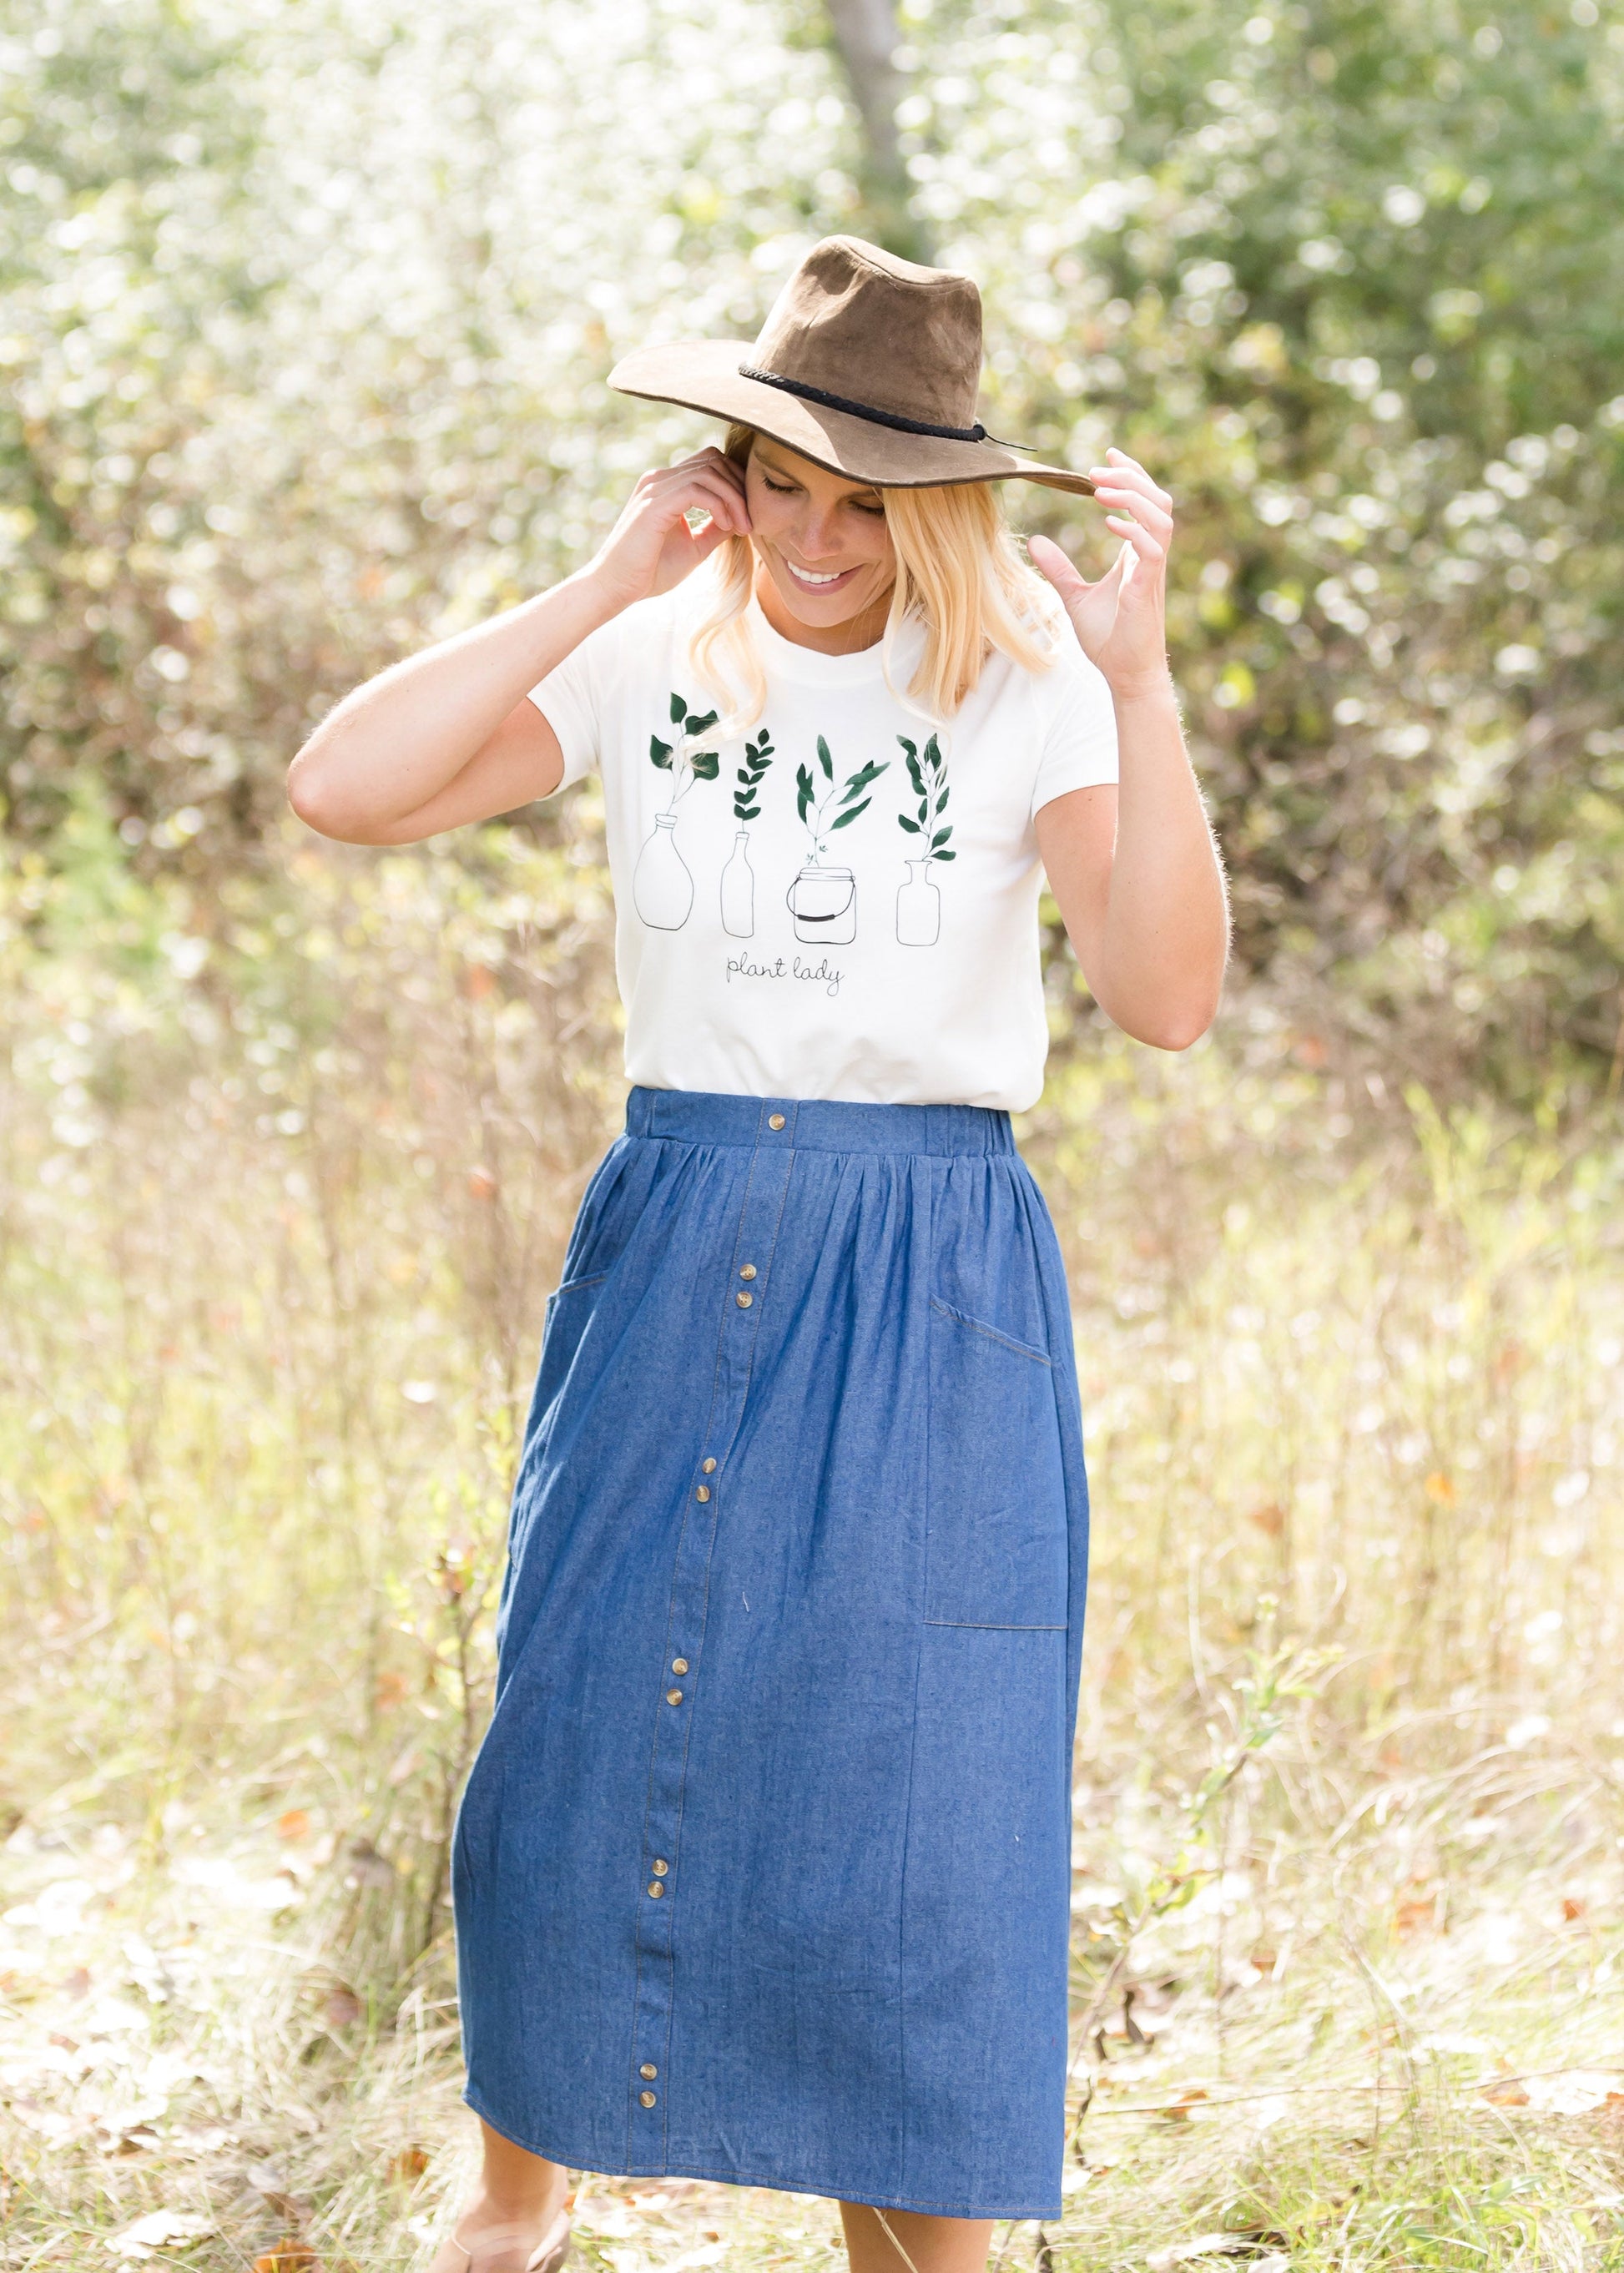 Plant Lady Graphic Tee - FINAL SALE Tops